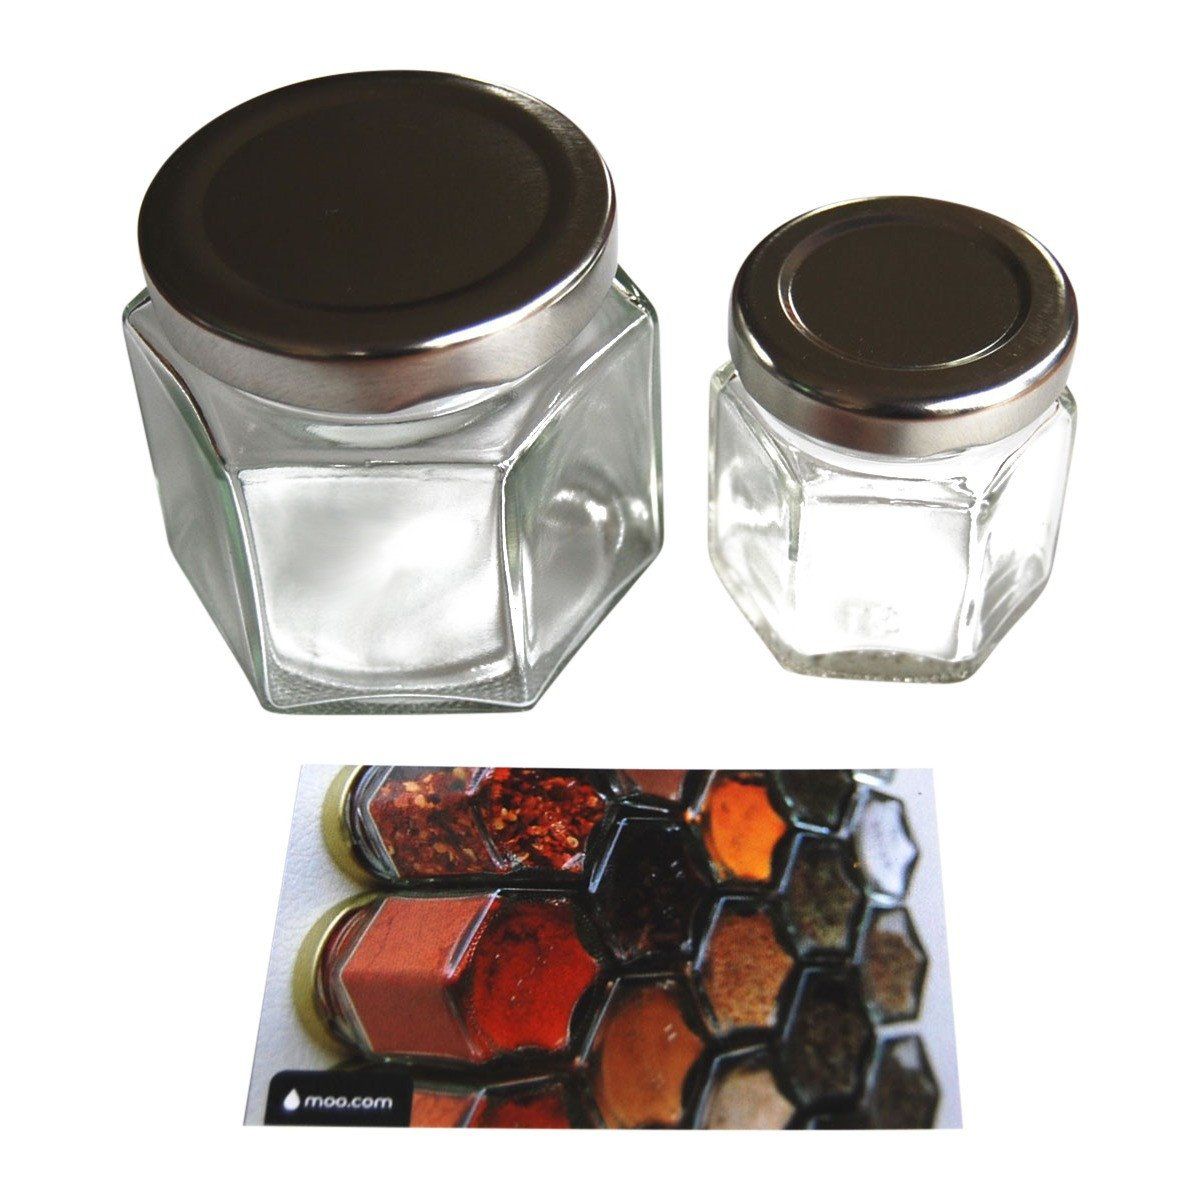 Small Hexagon Glass Spice Jars 20 Sets with magnetic Lids, Shaker